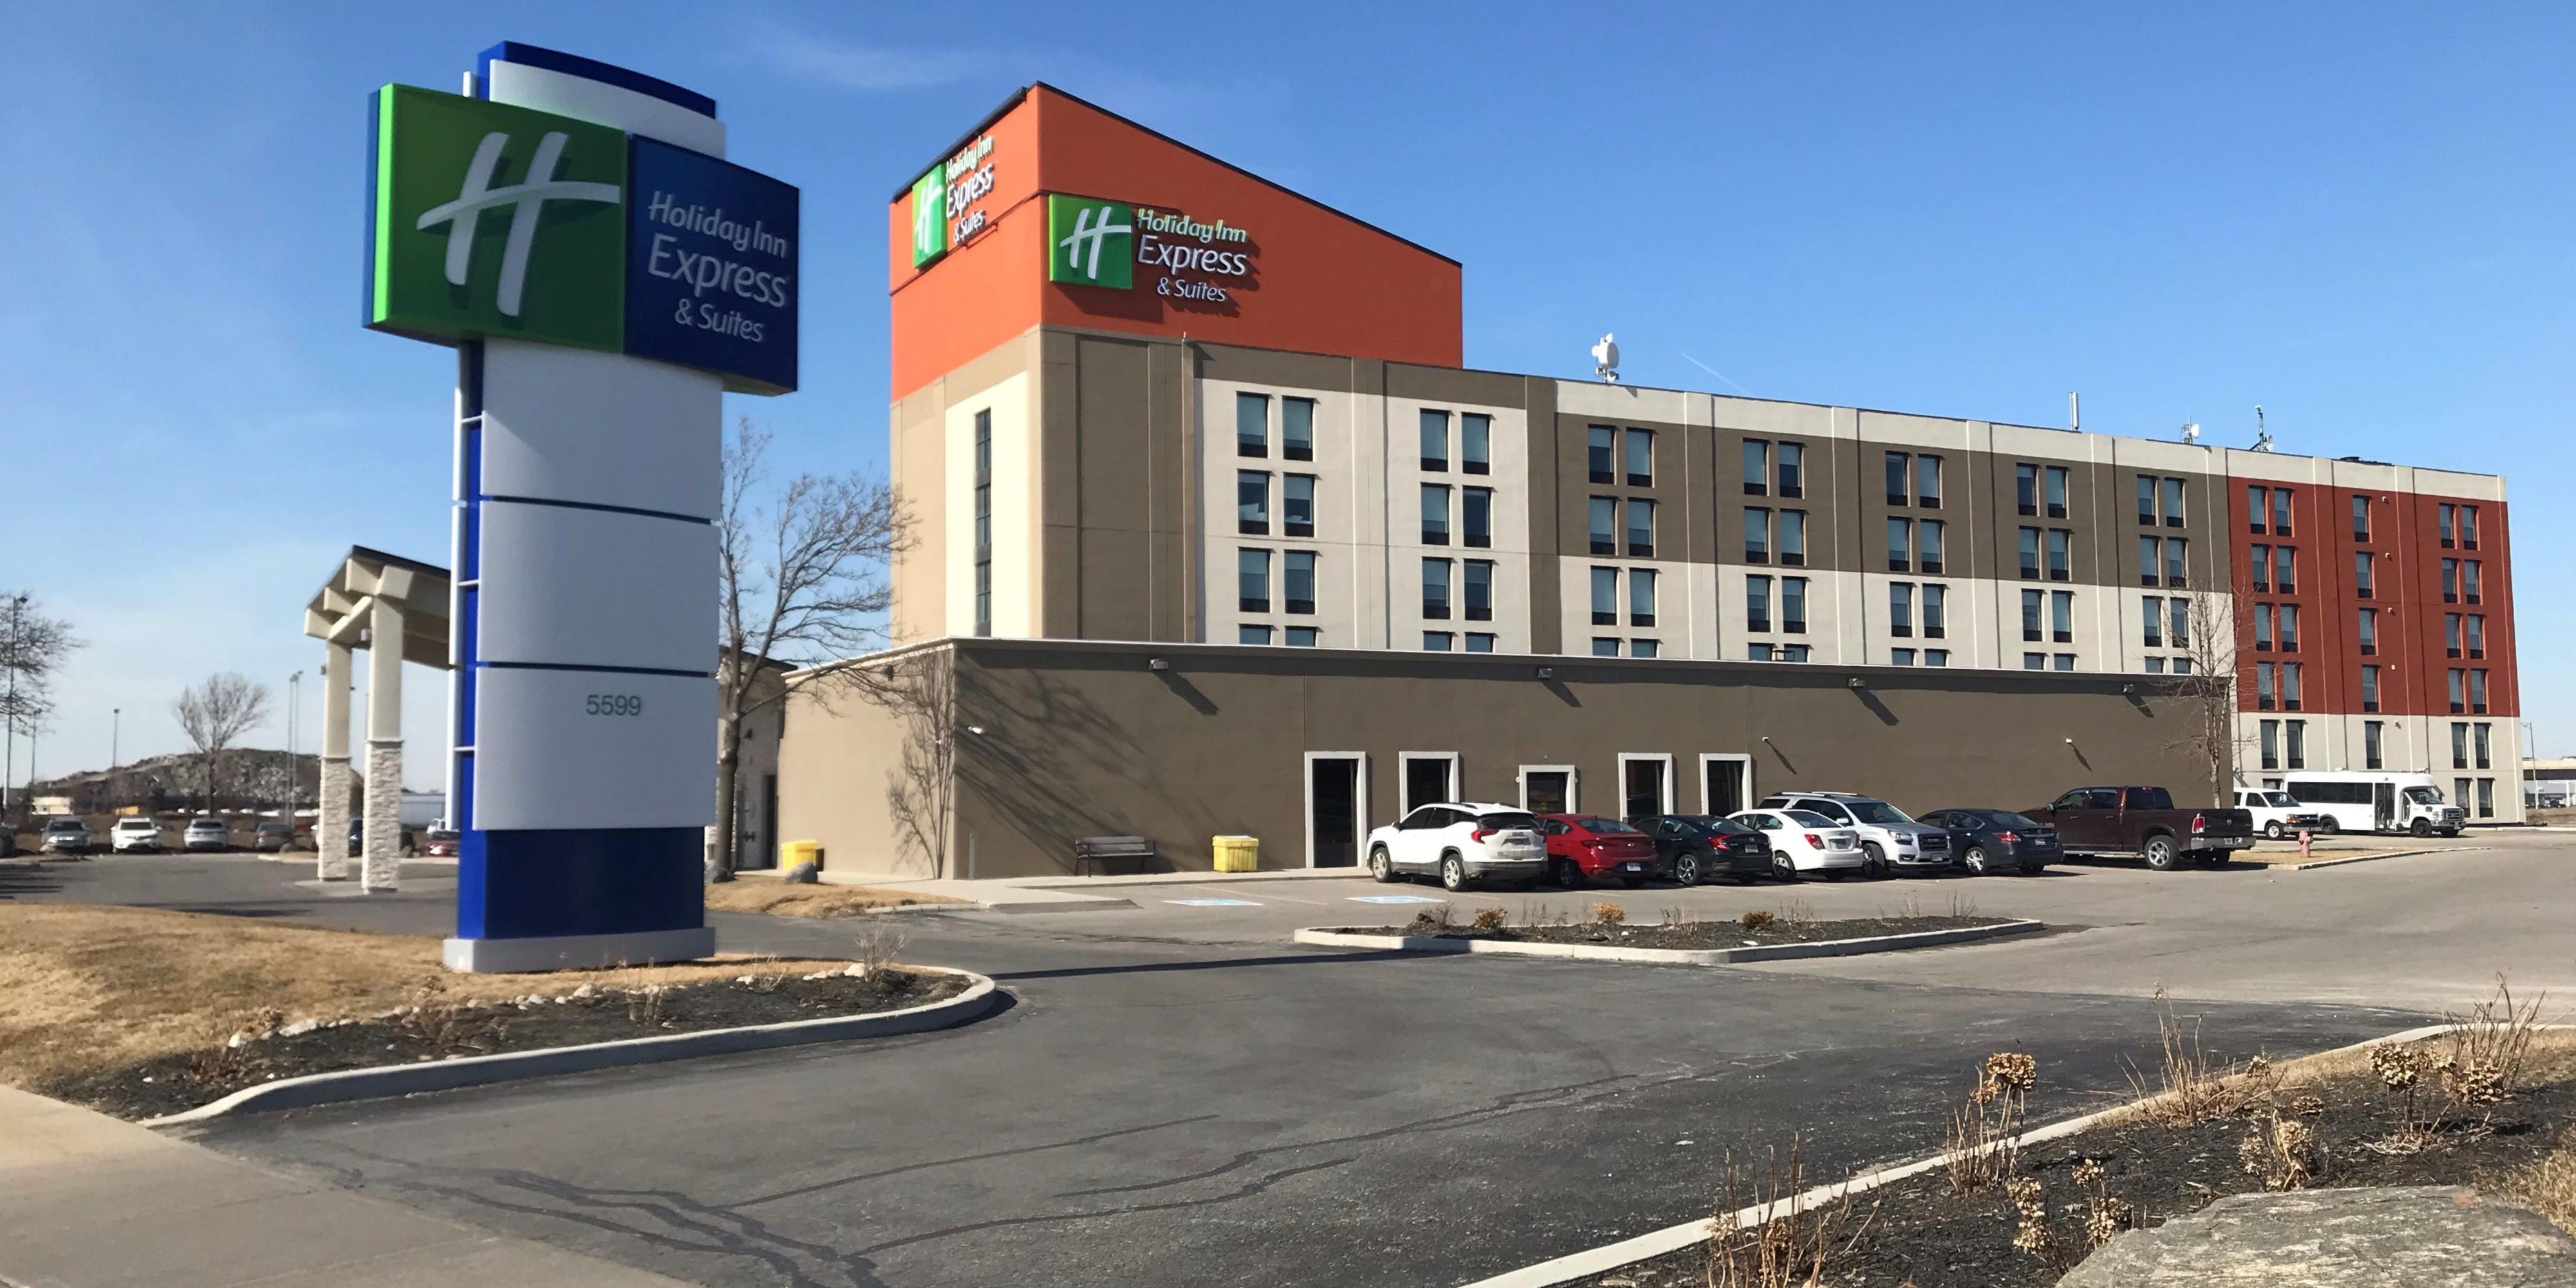 Airport Shuttle - We offer 24-hour complimentary shuttle service to Toronto Pearson International Airport. Look for the blue Holiday Inn Express Toronto Airport West logo on the van. 